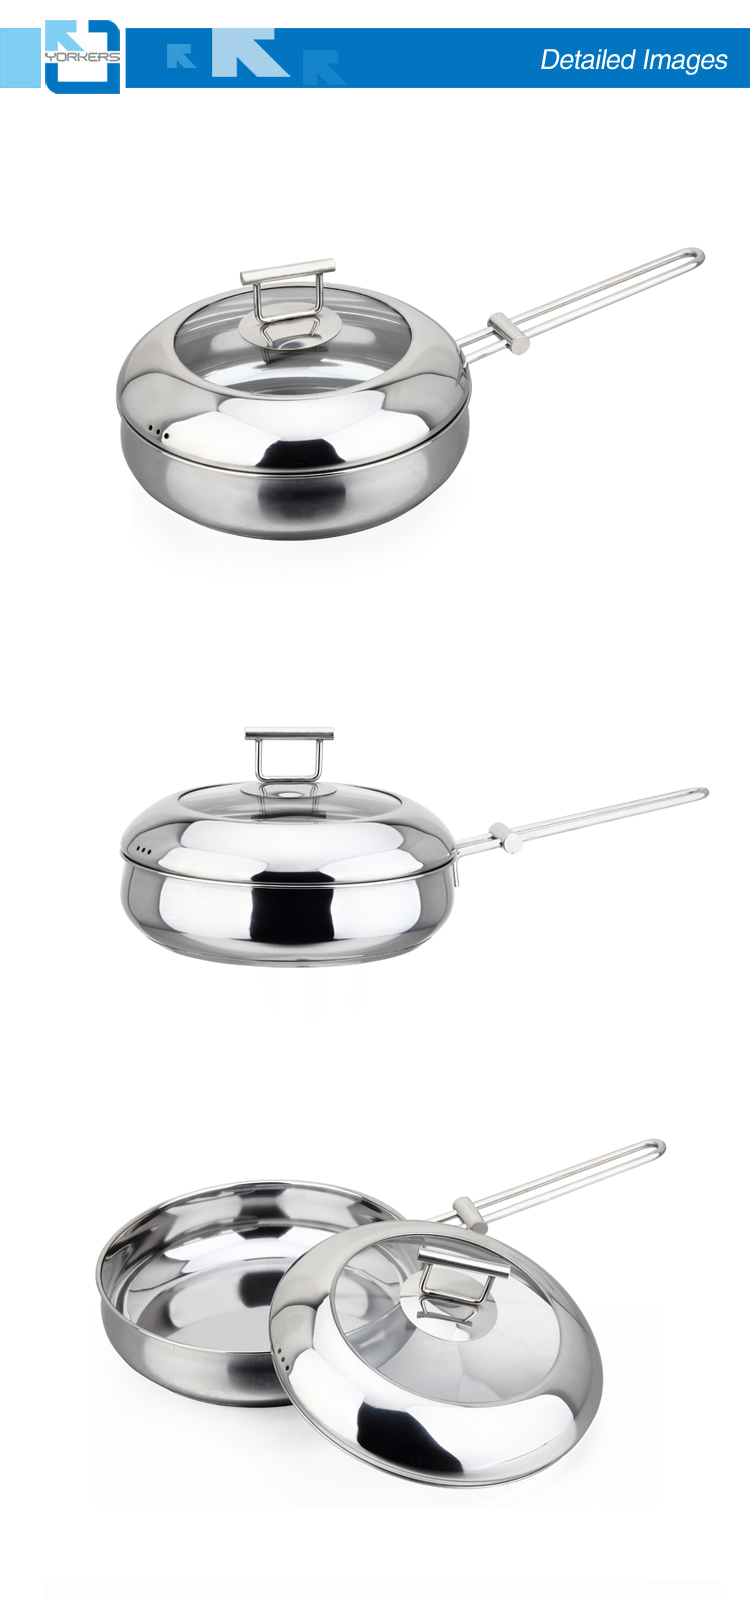 High Quality 304 Stainless Steel Double Bottom Frying Pan